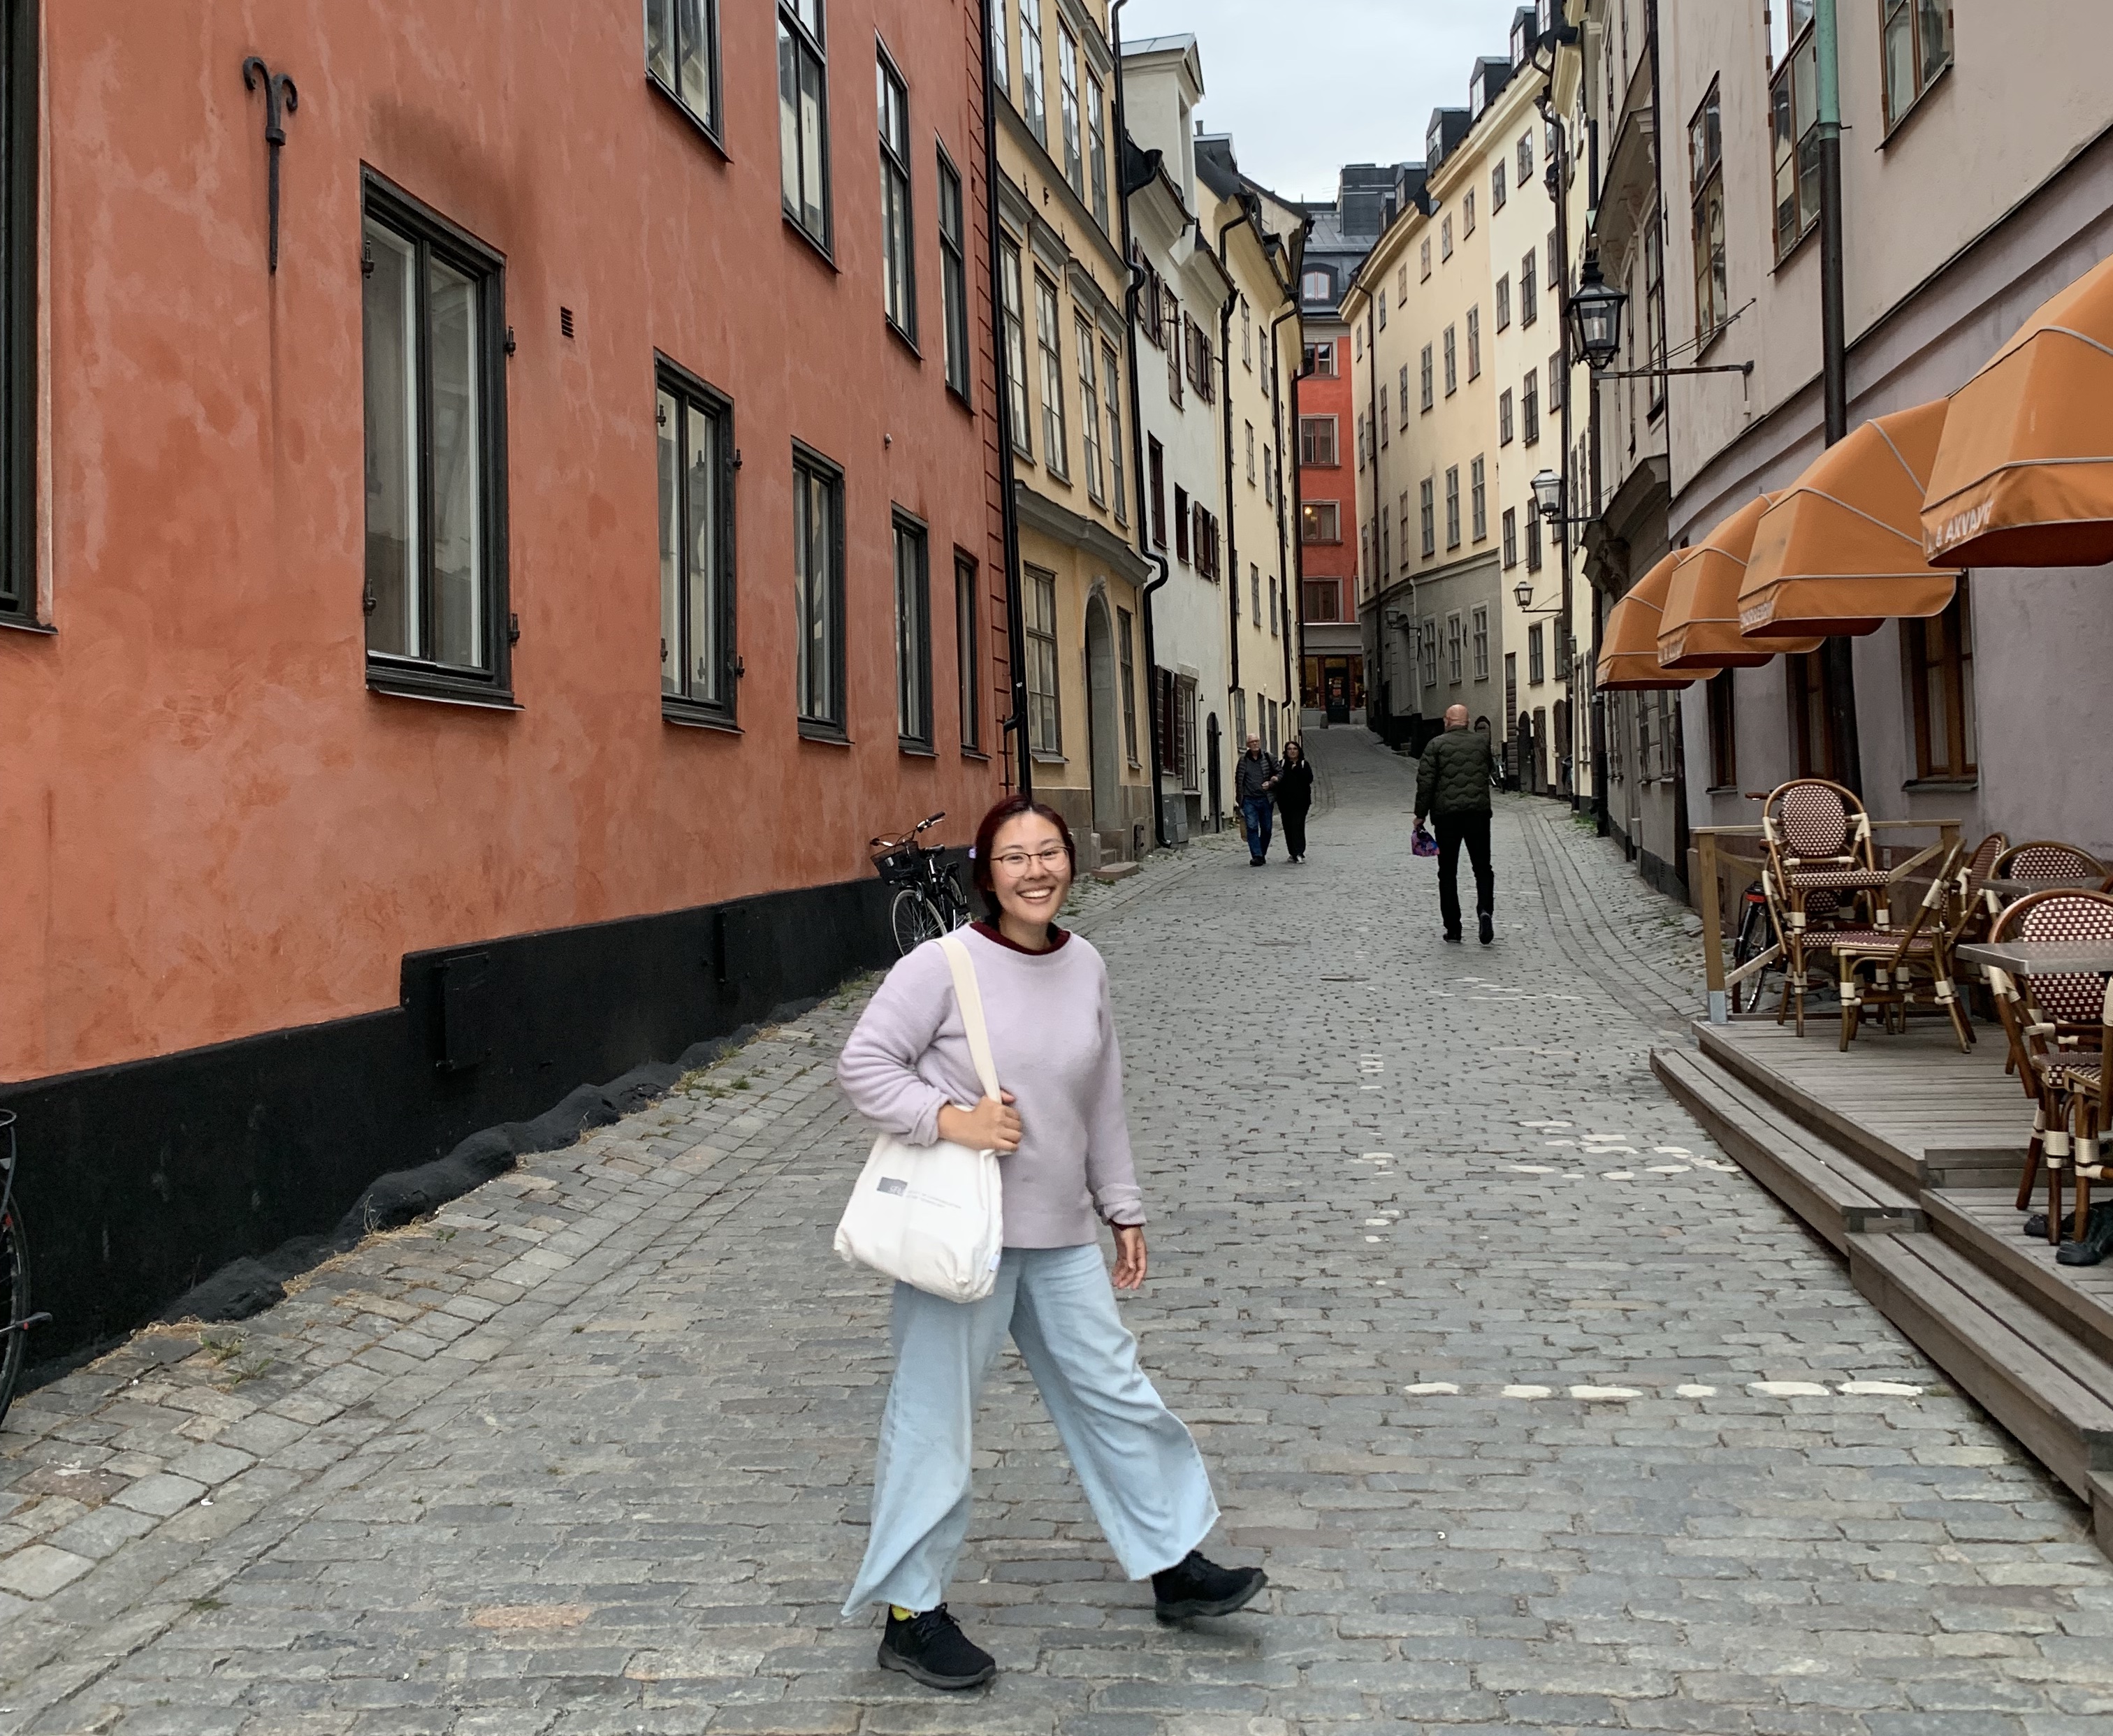 Kitty smiling and standing in a Stockholm street 